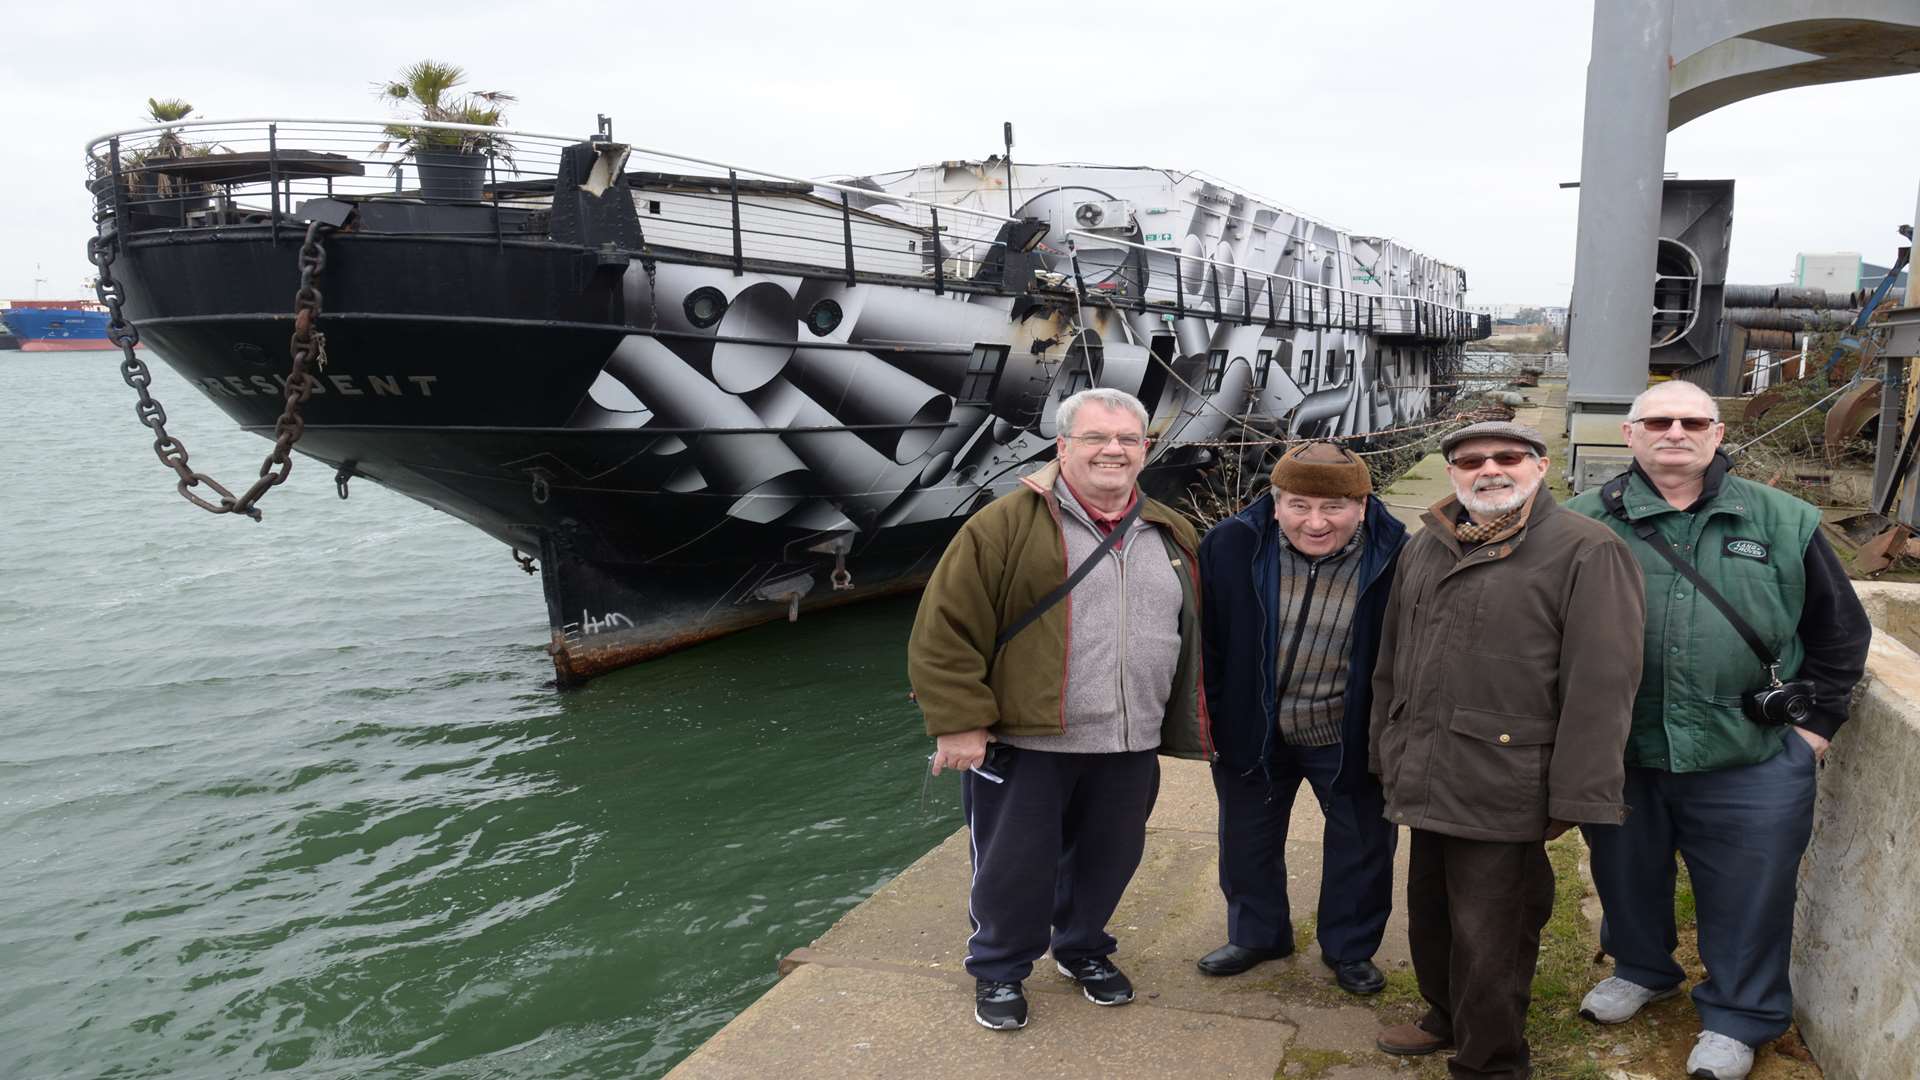 Members of the HMS President Preservation Trust with the ship, currently berthed in Chatham